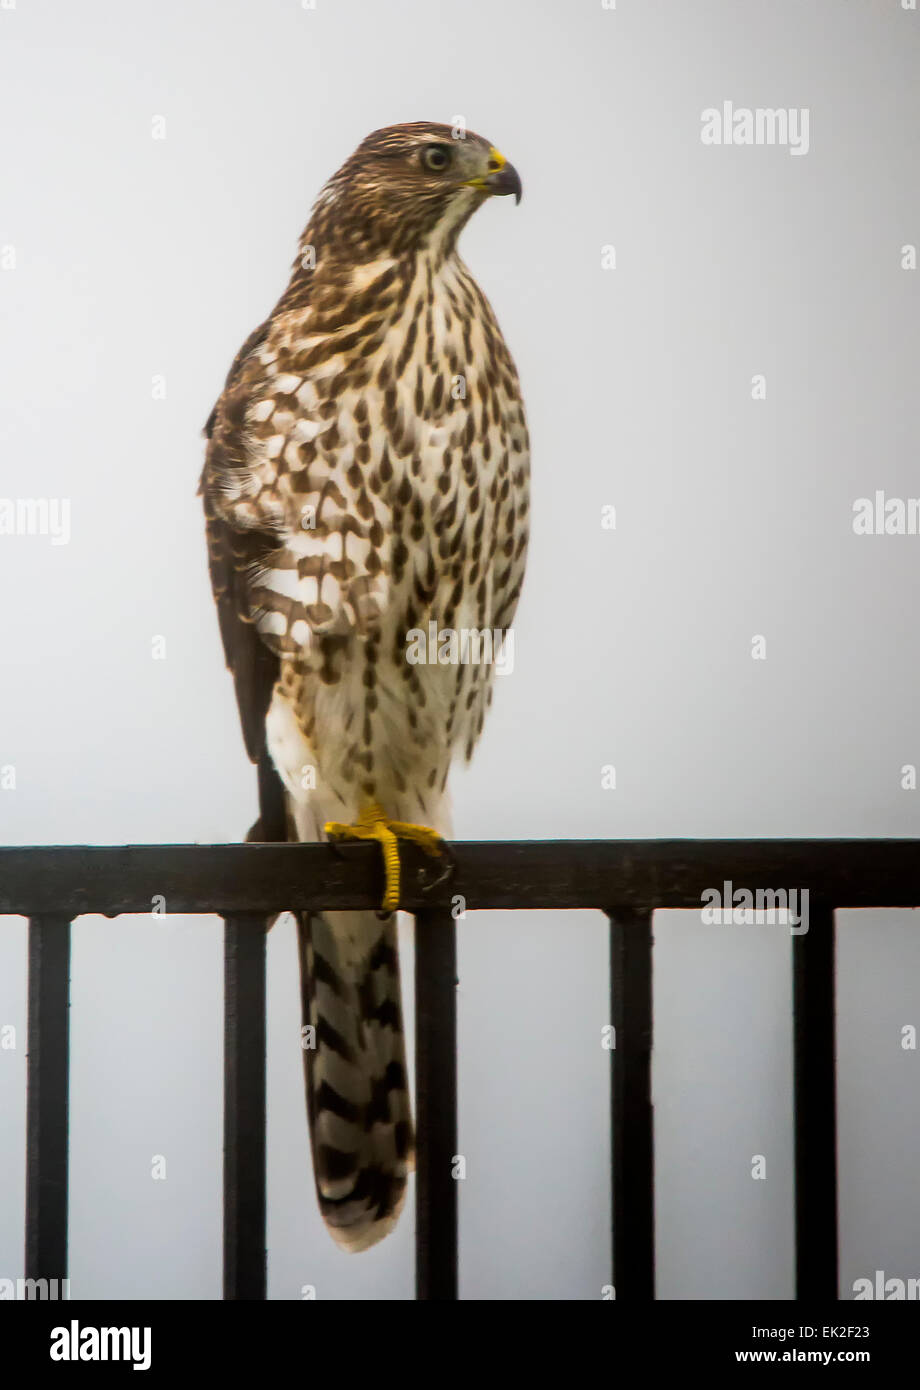 Cooper's Hawk (Accipiter cooperii)  perched on a backyard fence in the city Stock Photo